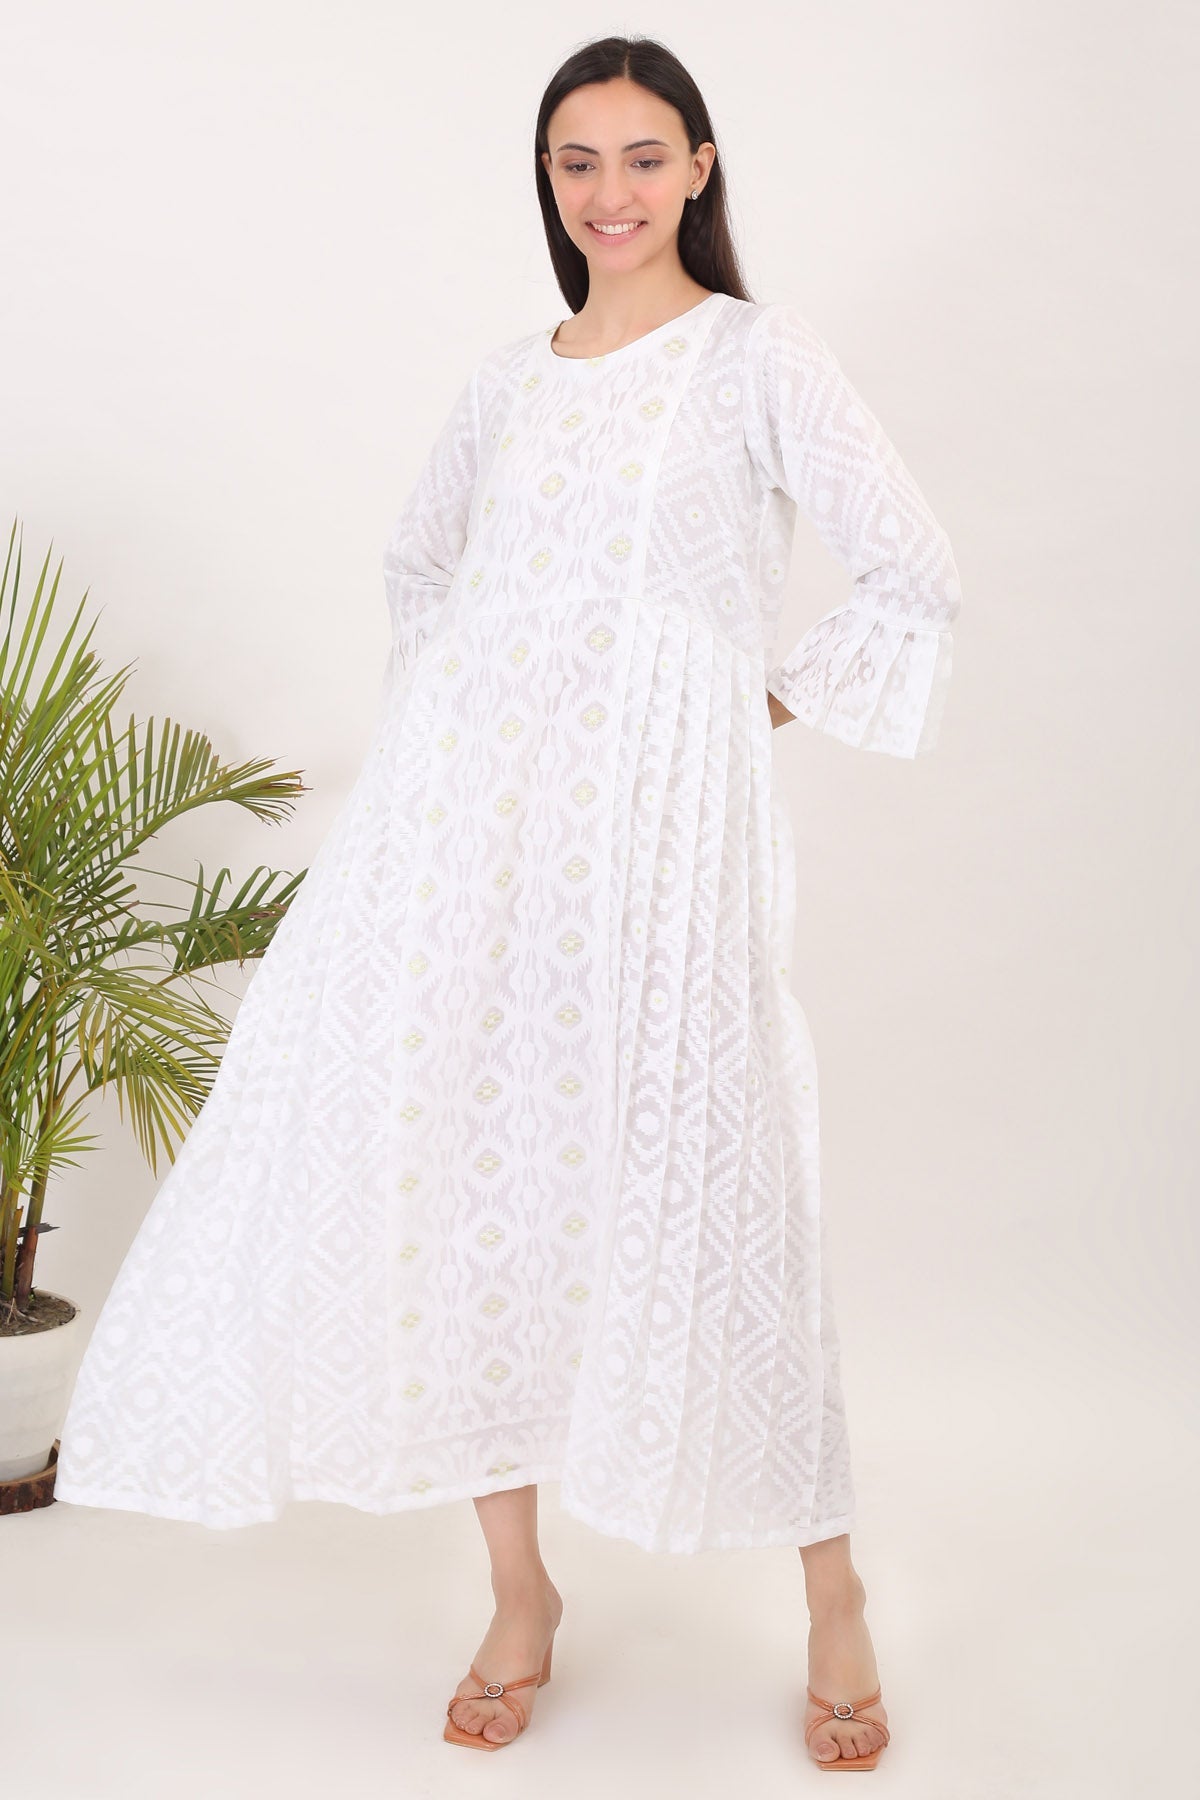 Buy Simply Kitsch White Dress for Women online available at ScrollnShops